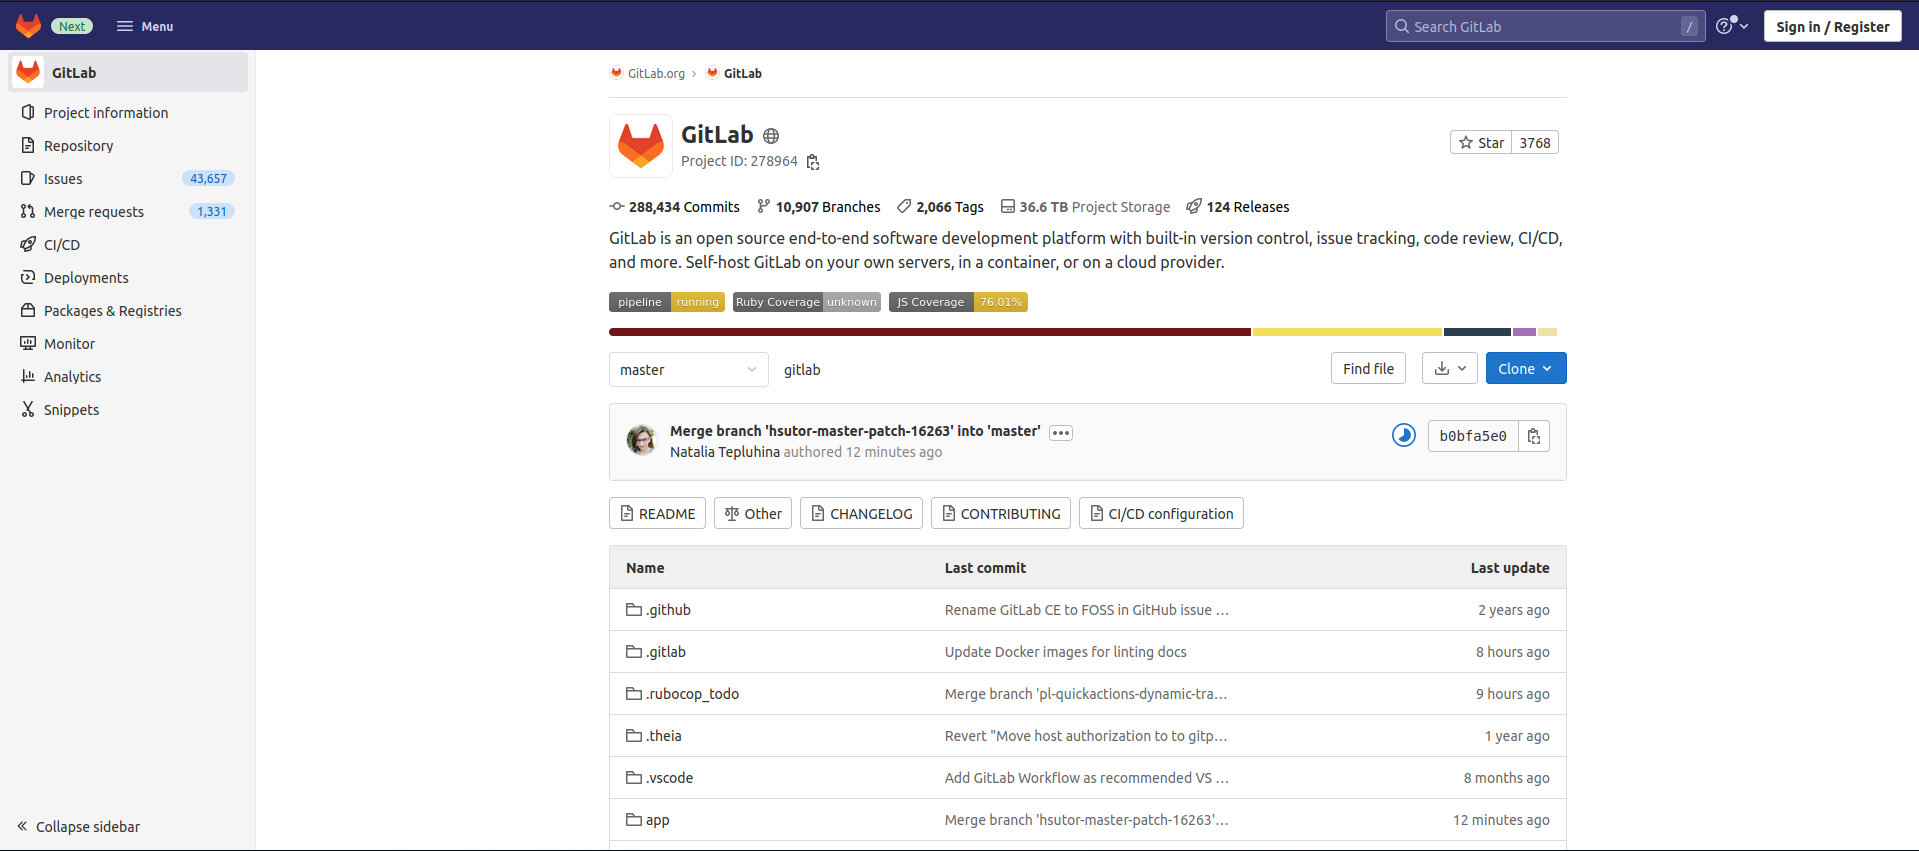 An overview of the GitLab Project